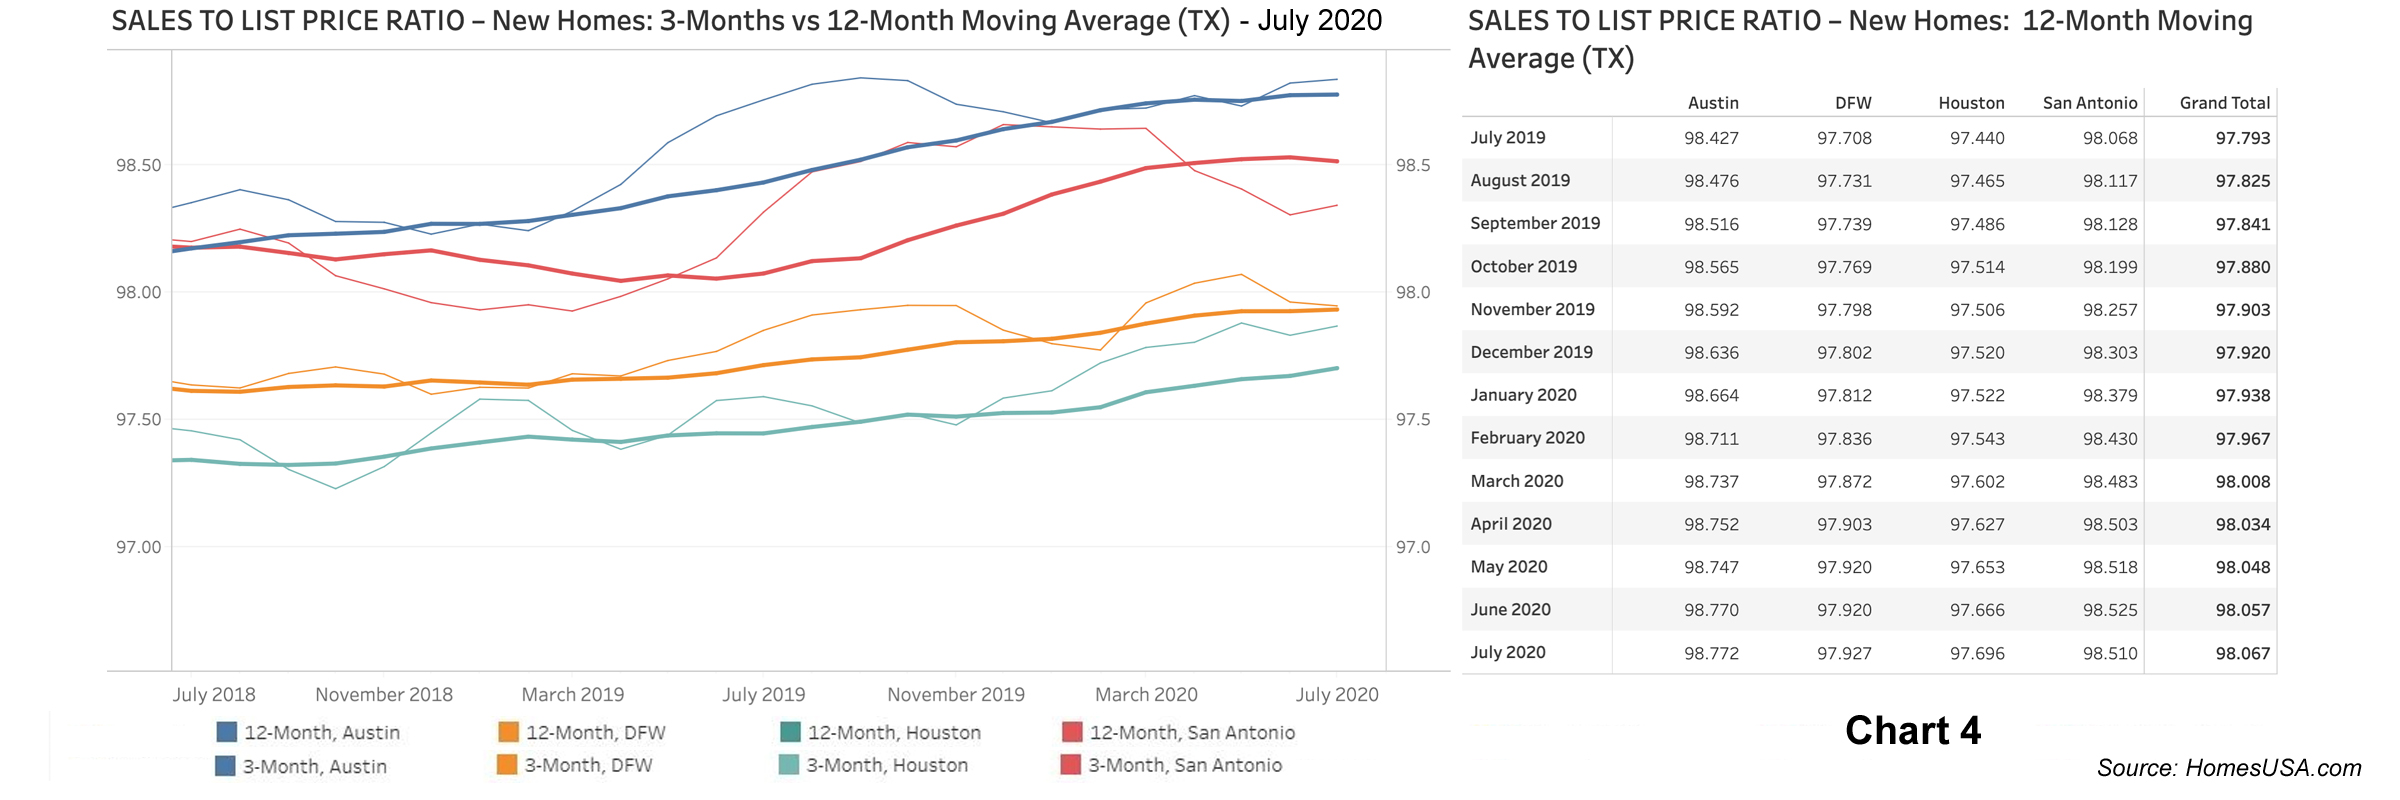 Chart 4: Sales-to-List-Price Ratio Data for Texas New Homes - July 2020